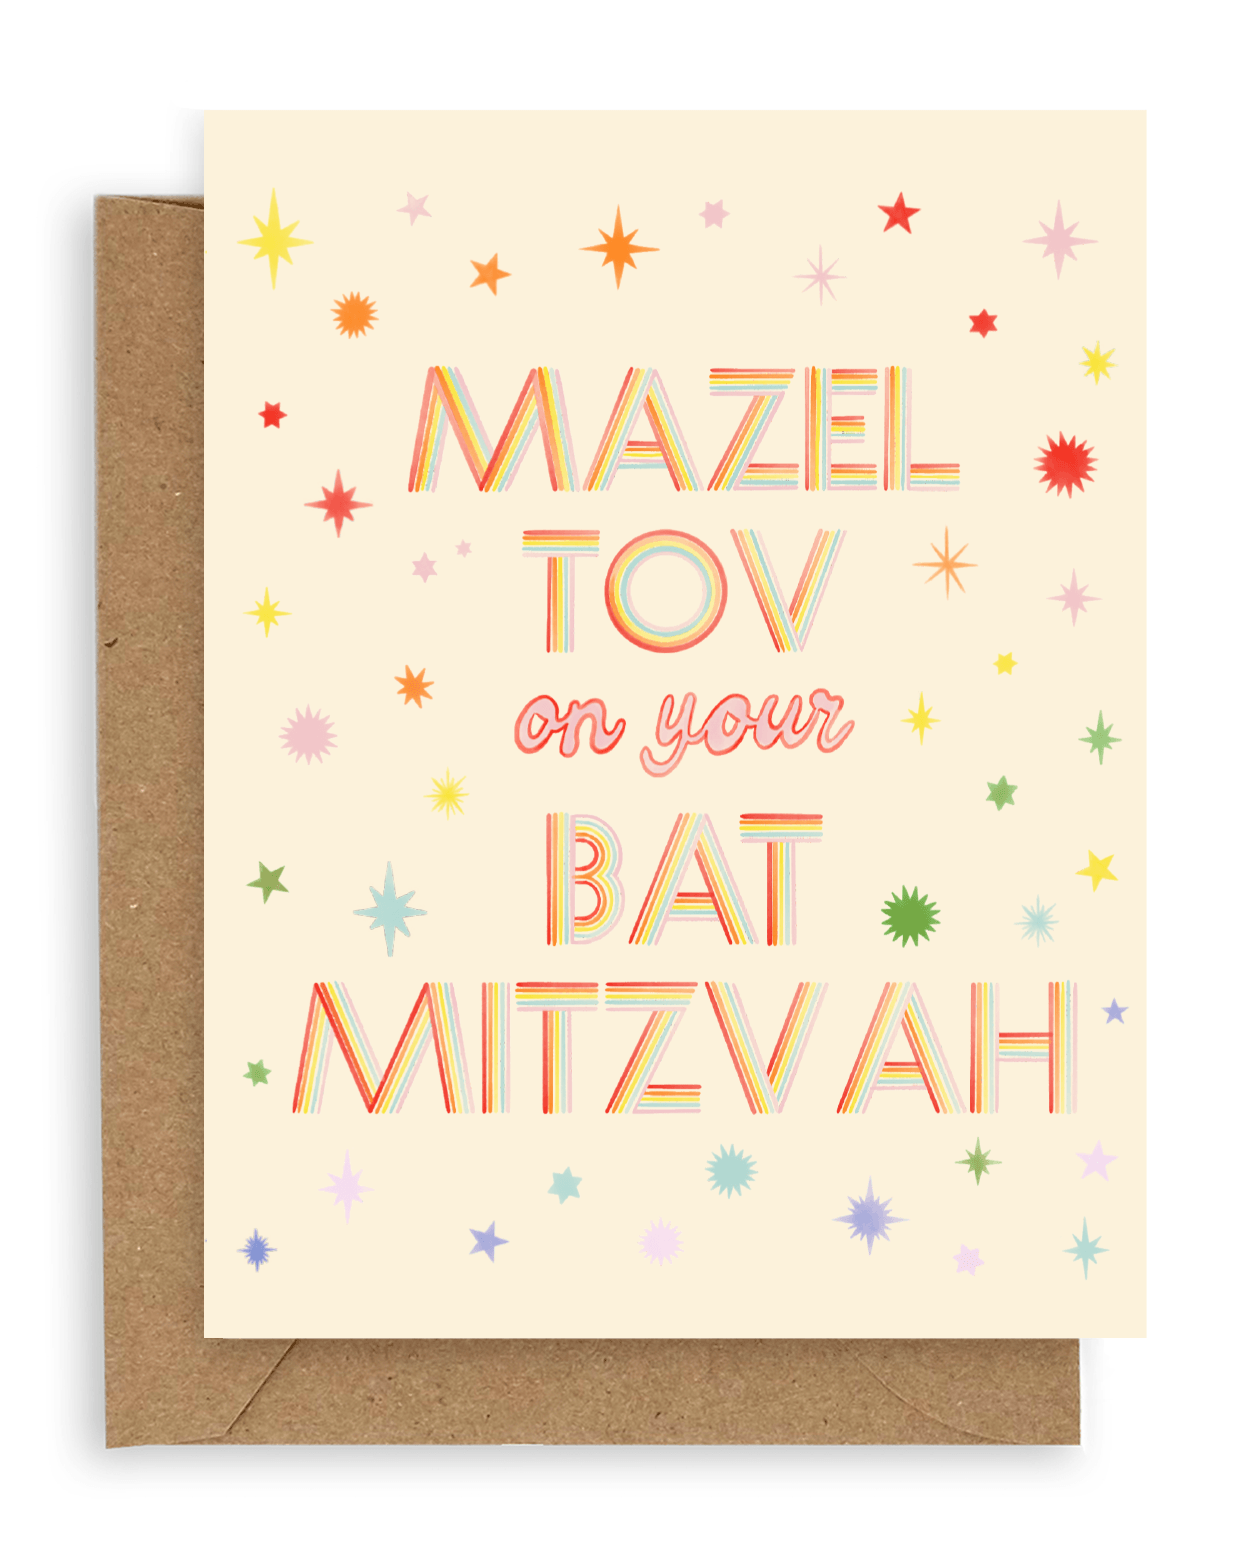 Rainbow colored stars surround the words "Mazel tov on your bat mitzvah" in multi-colored font printed on a cream background. Shown with kraft envelope.